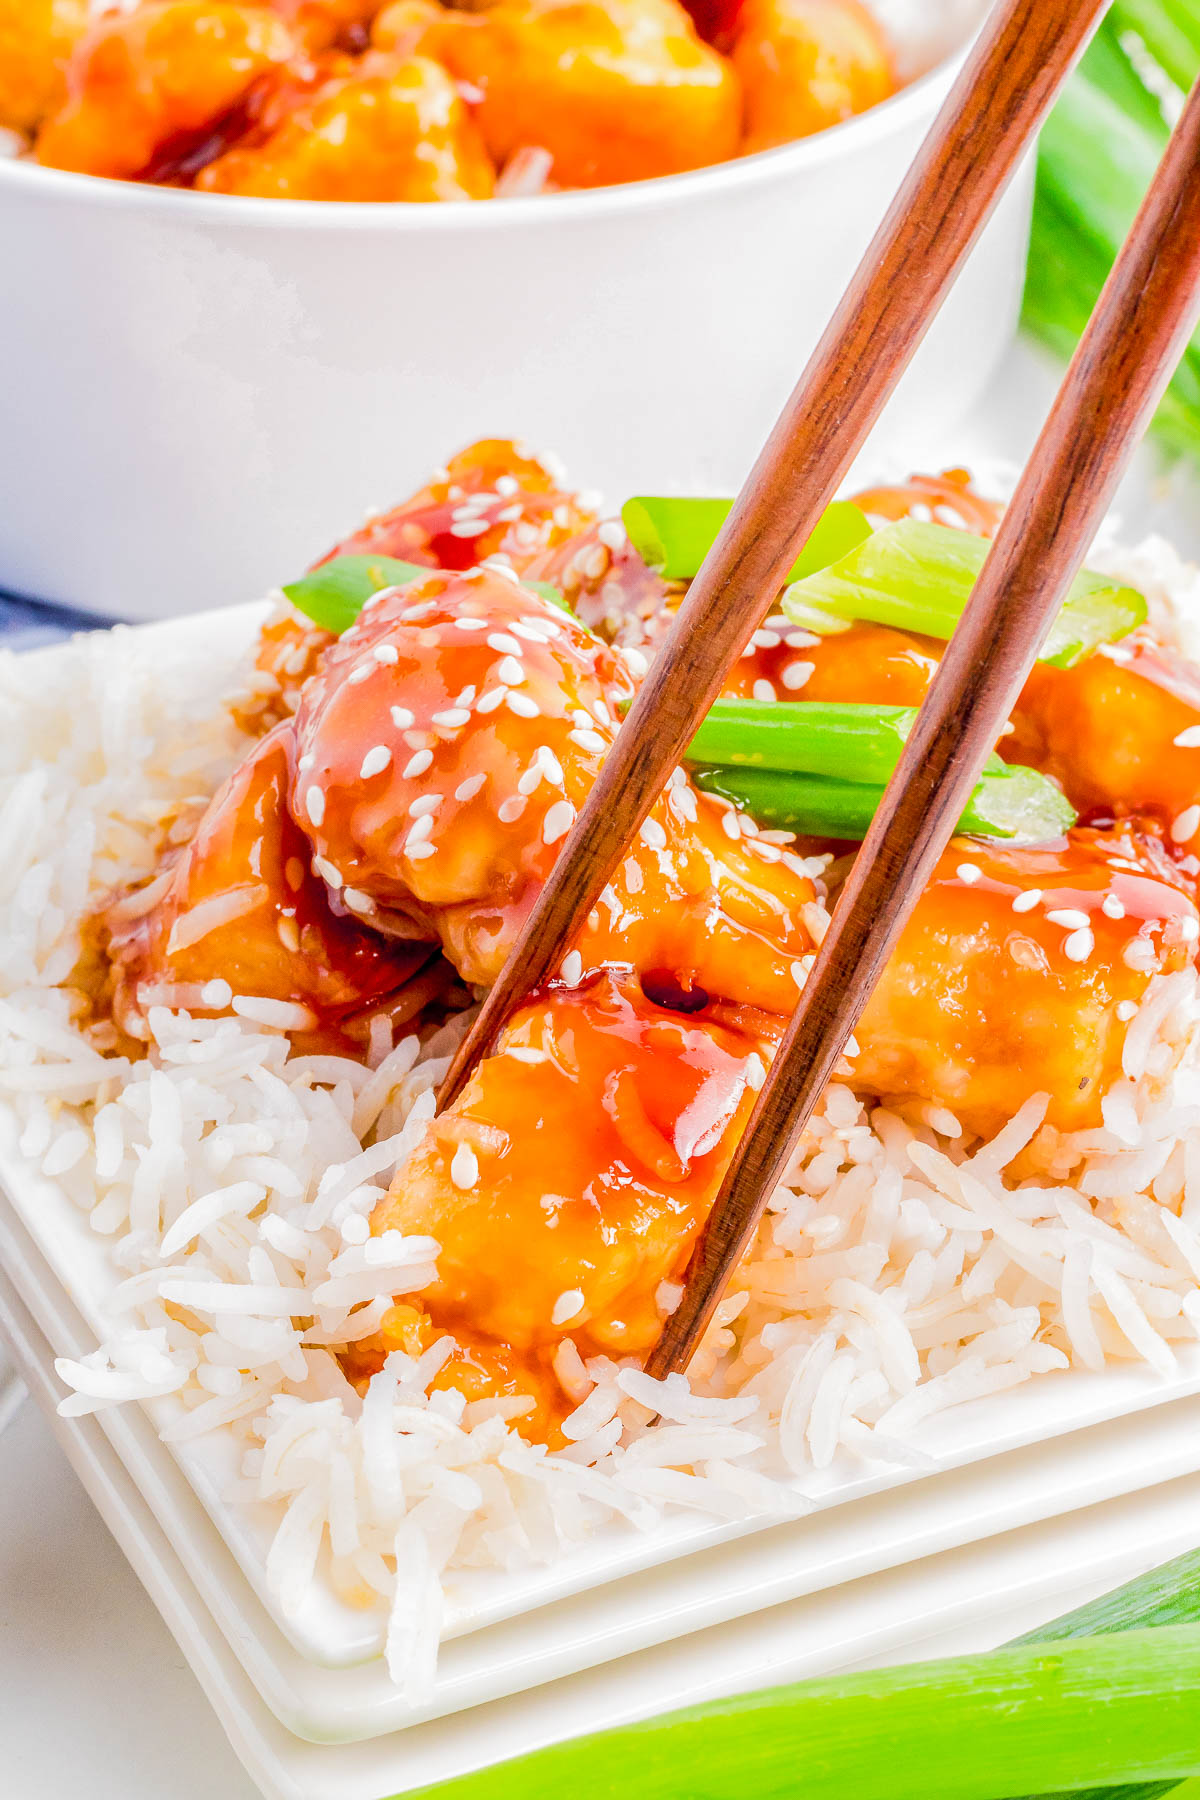 A close-up of chopsticks holding a piece of Mongolian chicken over a bed of white rice, garnished with sesame seeds and green onions.